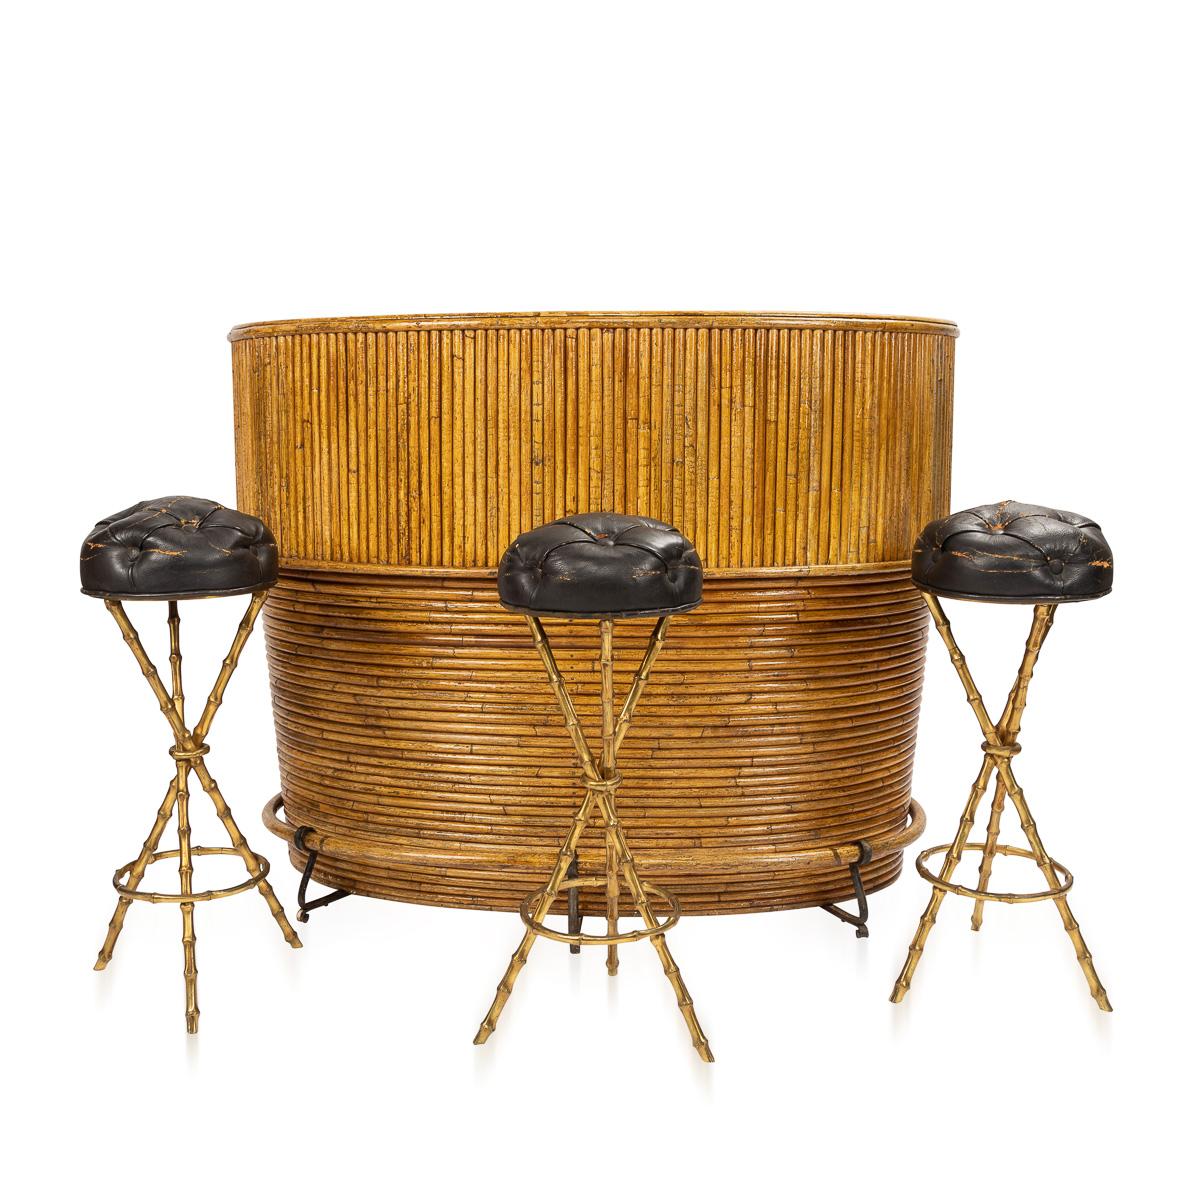 Iconic mid-20th century French Bamboo cocktail bar with a faux leather top and a shelf on the inside for storage and gilt brass faux bamboo tripod bar stools with original buttoned leather seats by Jacques Adnet.

An icon of luxurious French